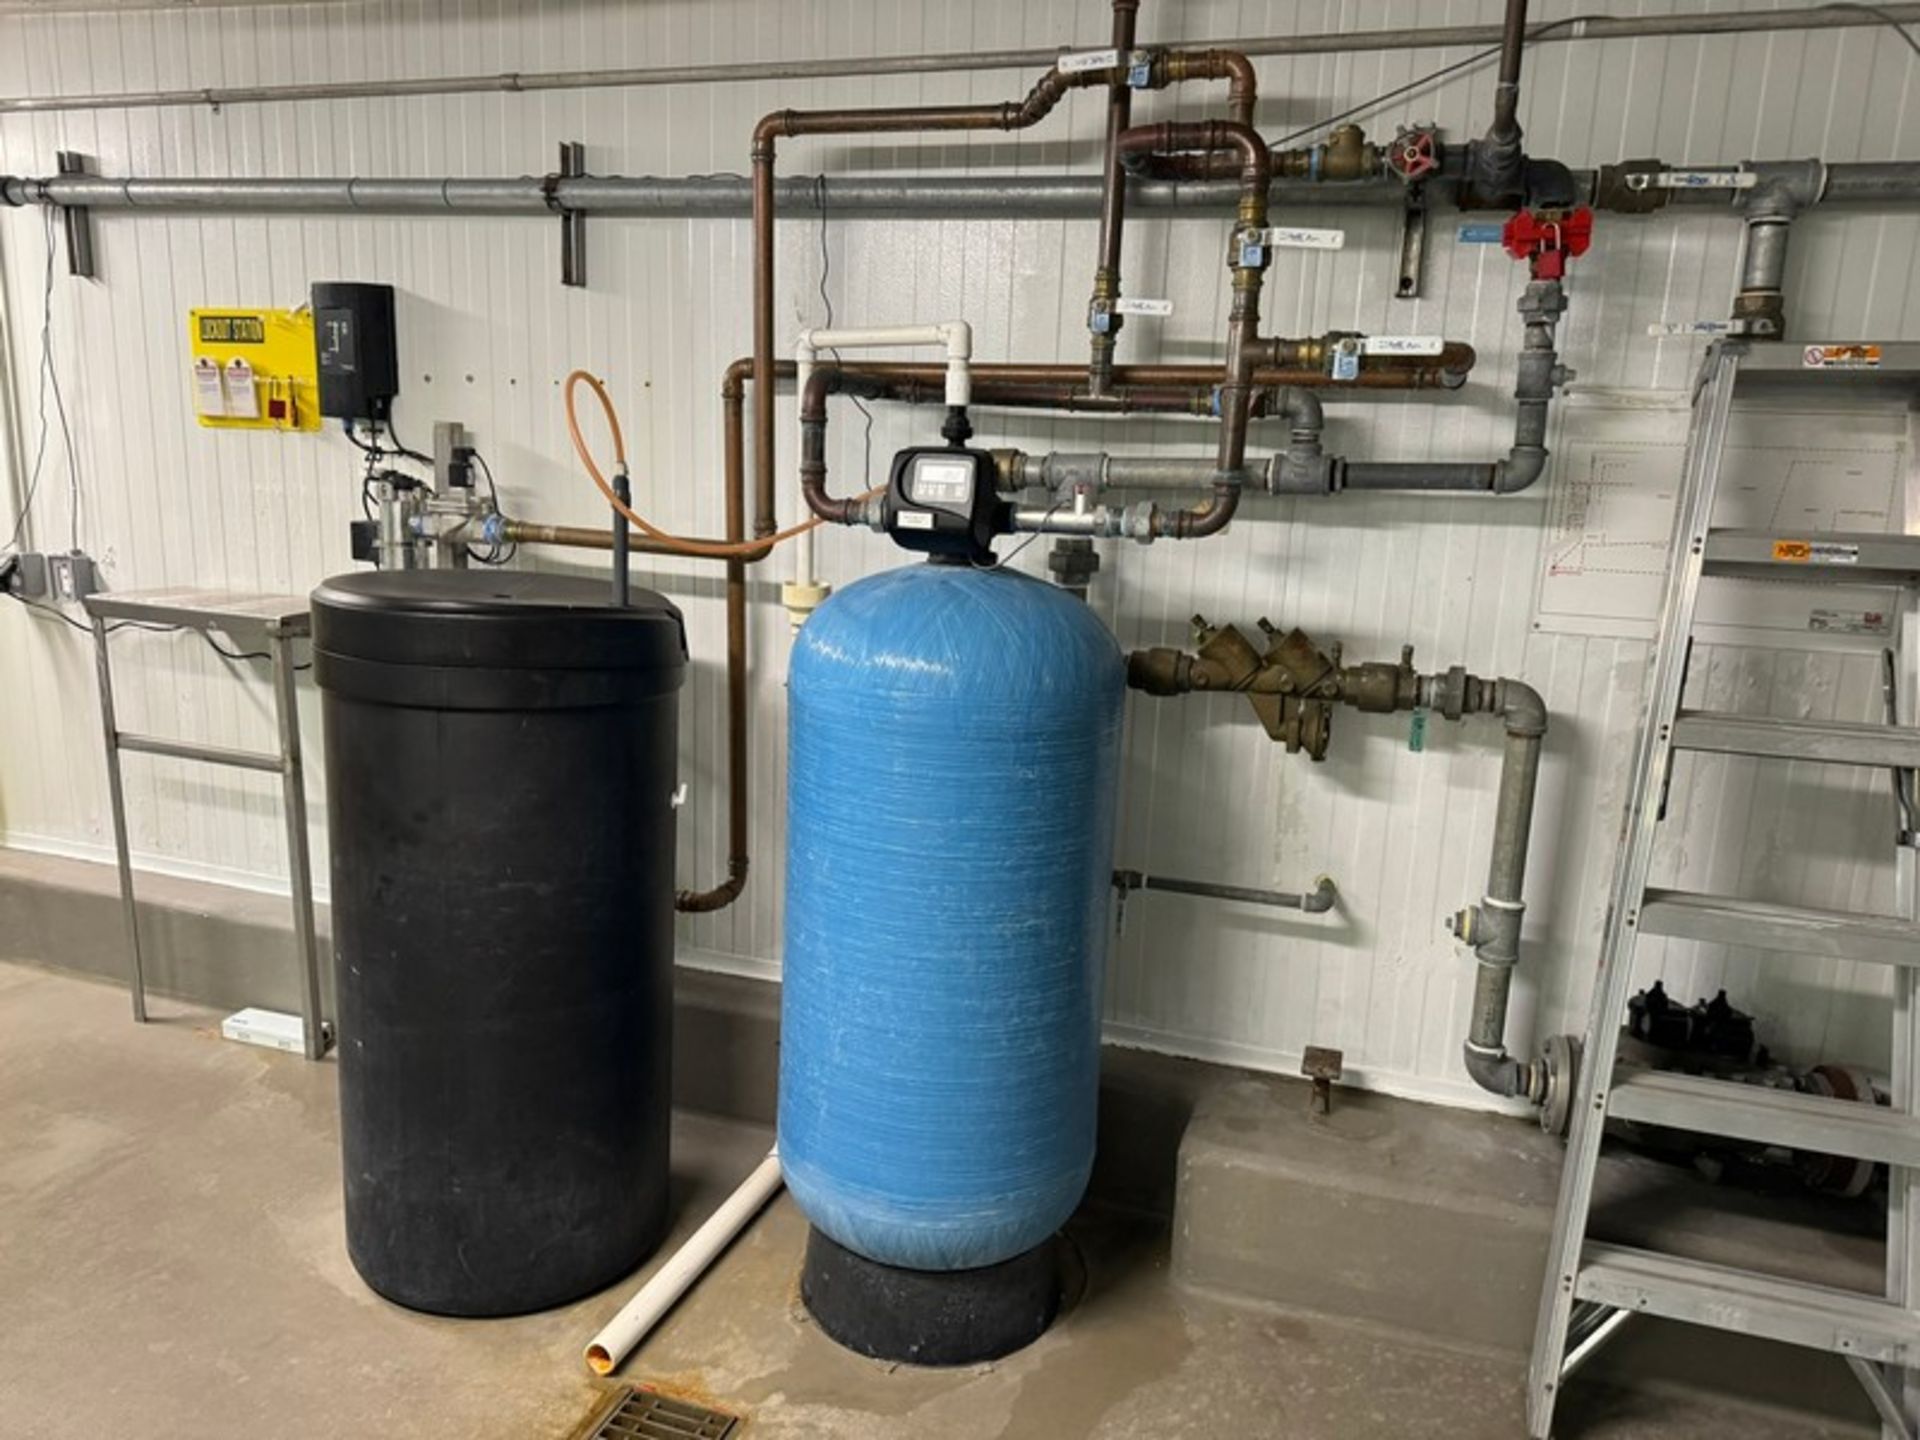 Single Tank Water Softener System, with Viqua UV Tube (LOCATED IN DECATUR, MI) - Image 2 of 2